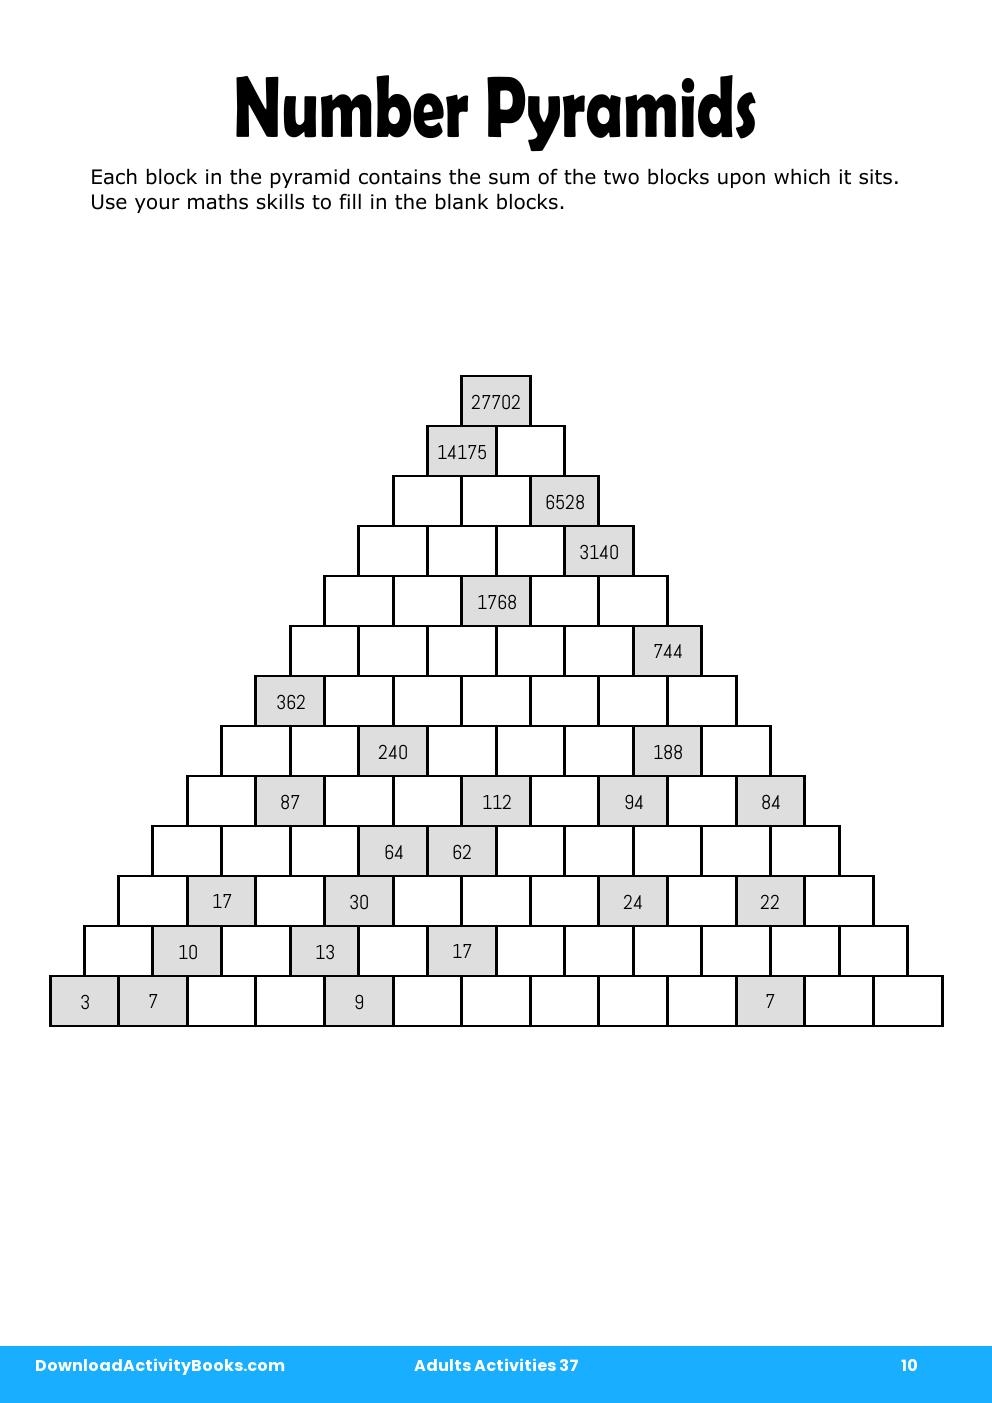 Number Pyramids in Adults Activities 37